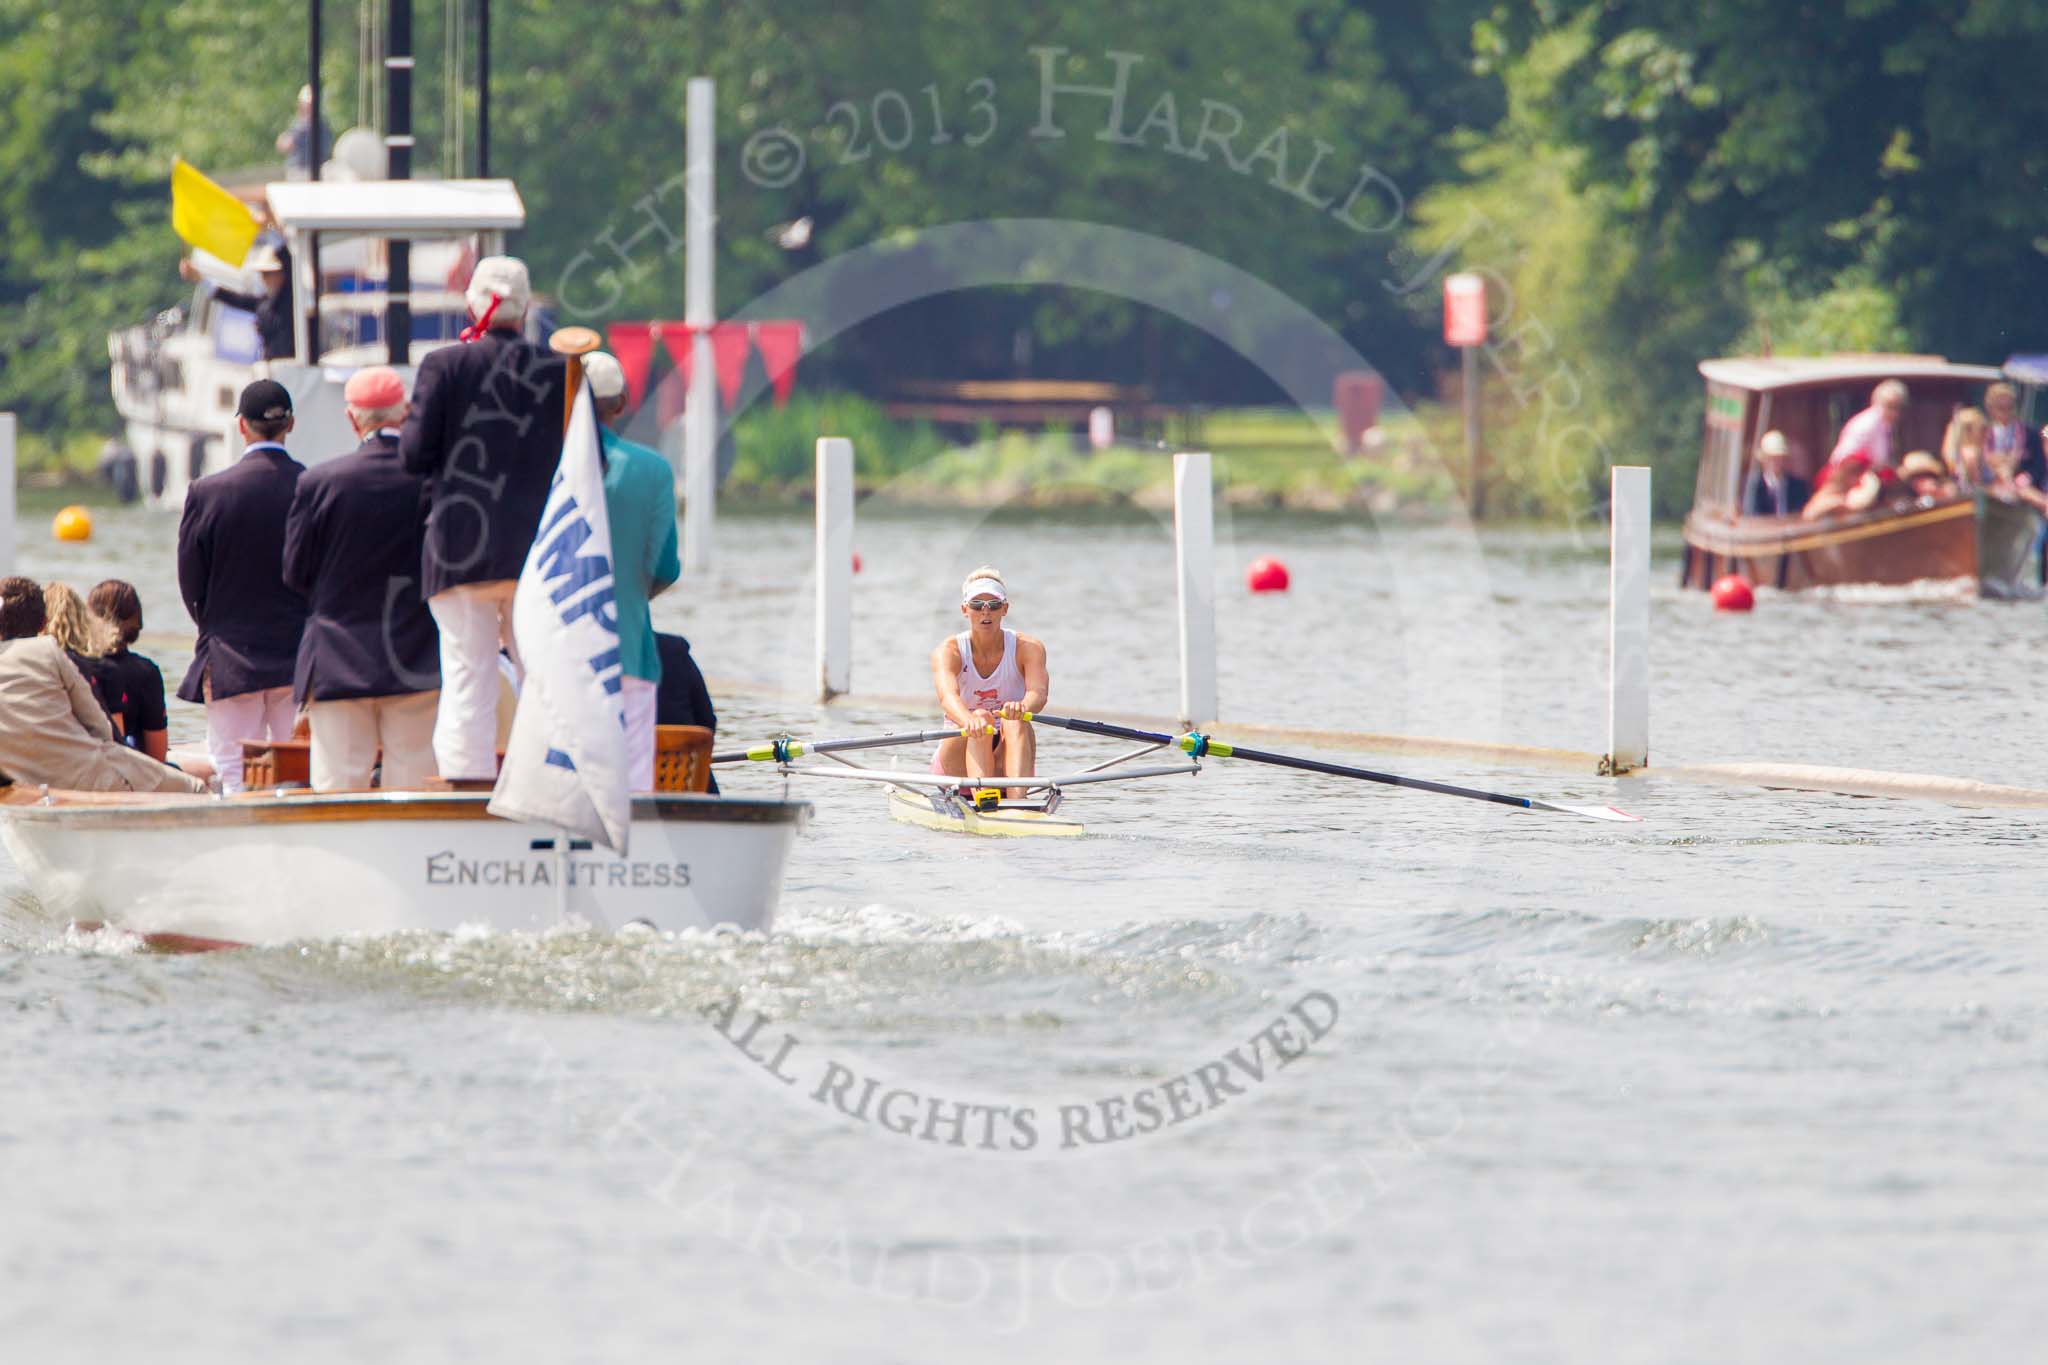 Henley Royal Regatta 2013, Saturday: Race No. 11 for the Princess Royal Challenge Cup, Victoria Thornley (Leander Club) v Emma Twigg (Waiariki Rowing Club, New Zealand), here Victoria Thornley. Image #233, 06 July 2013 11:41 River Thames, Henley on Thames, UK